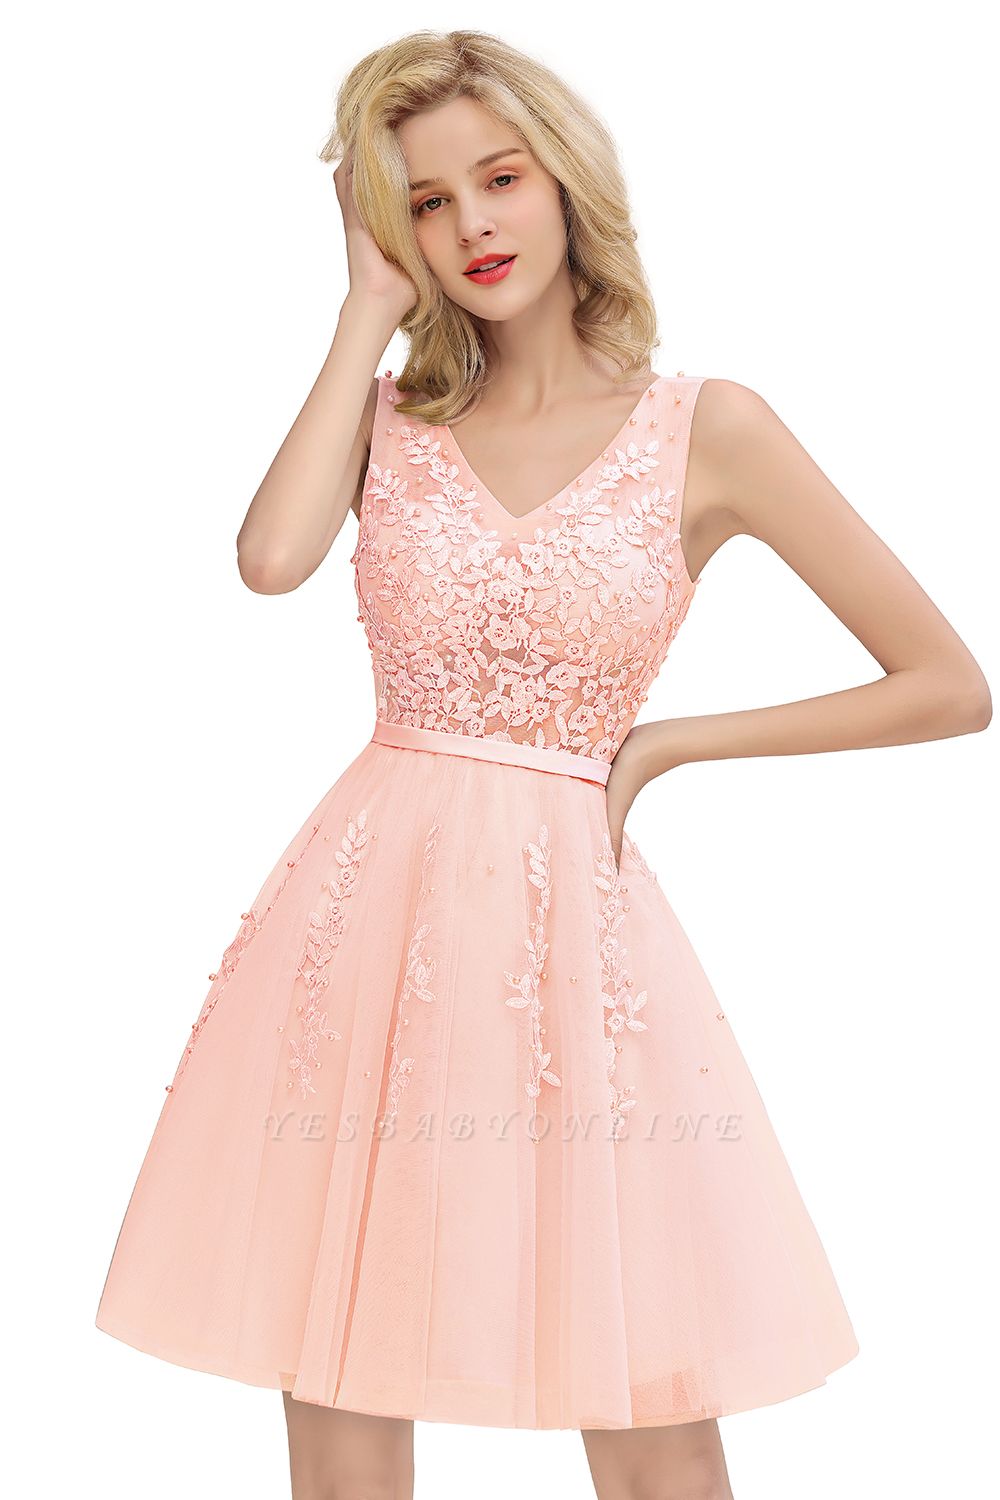 Lovely V-neck Lace-up Short Prom Dresses with Lace Appliques